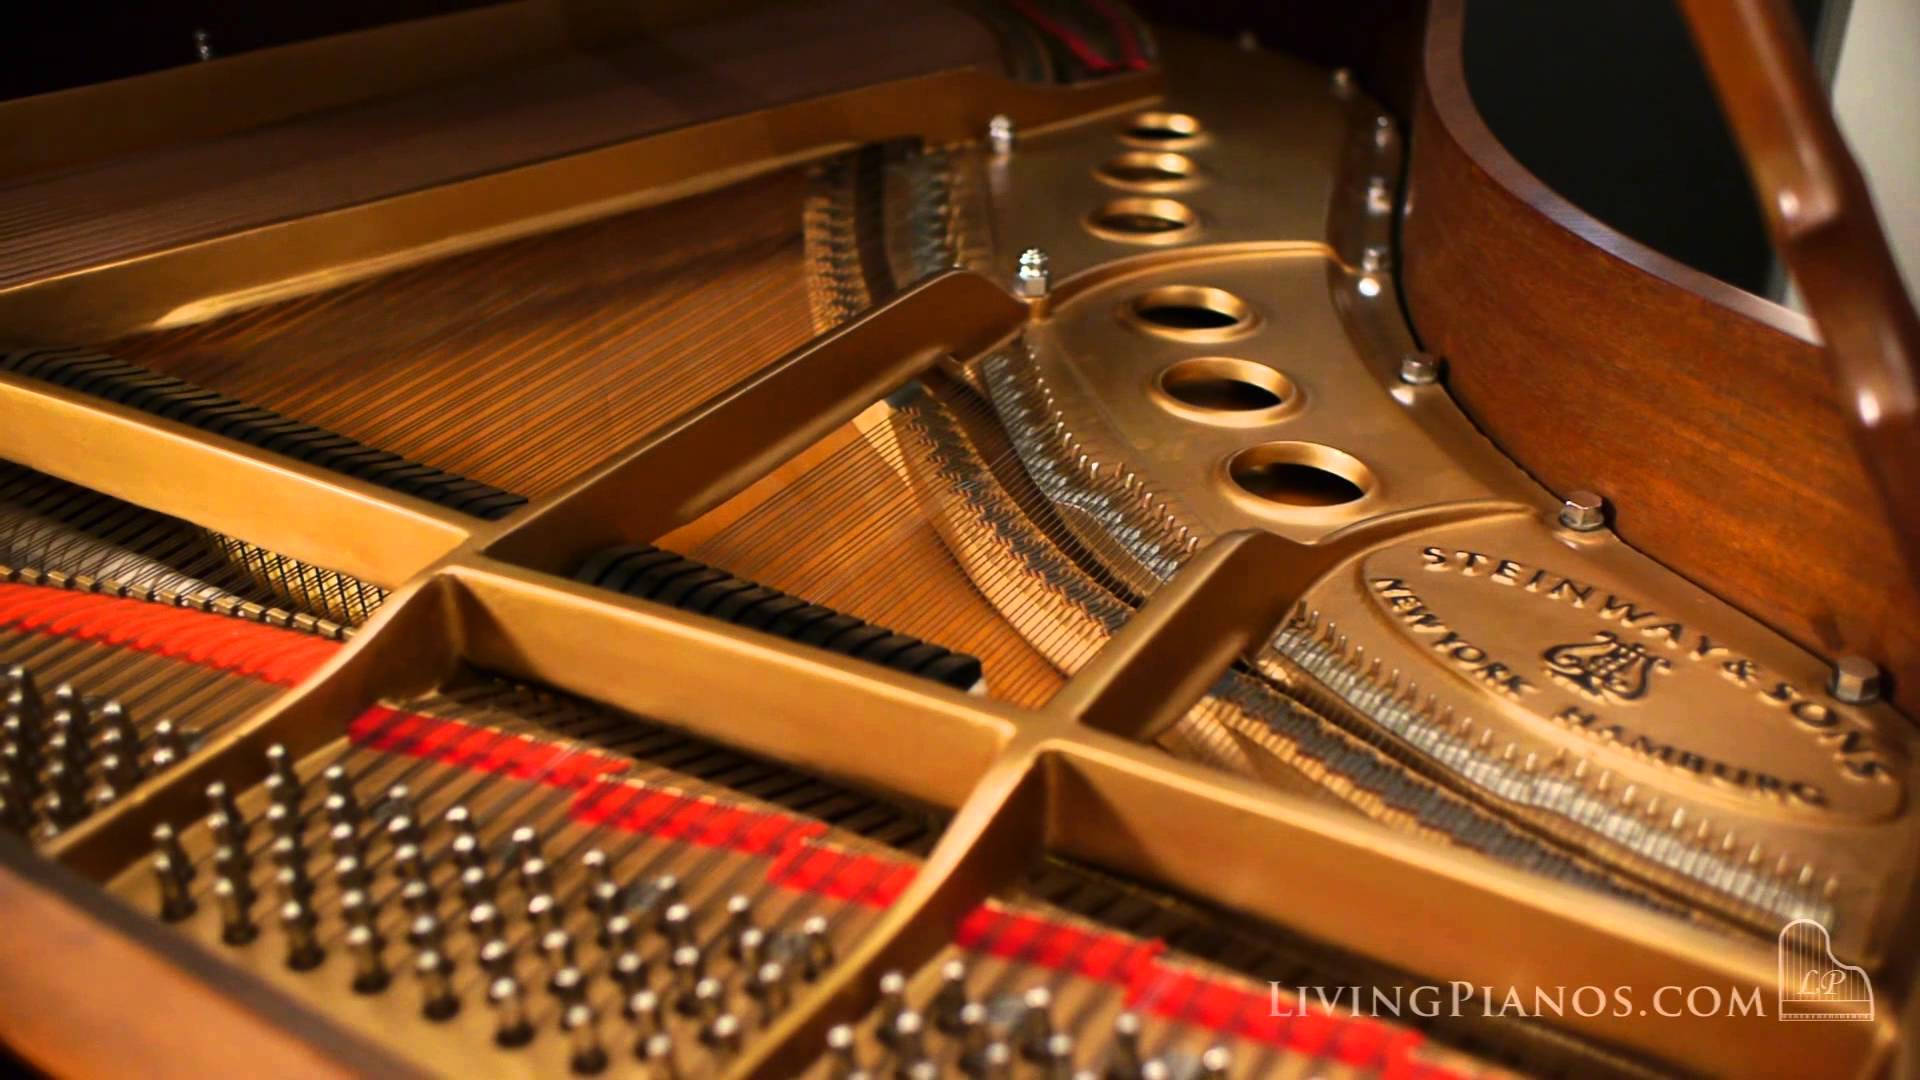 Piano Steinway & Sons Background